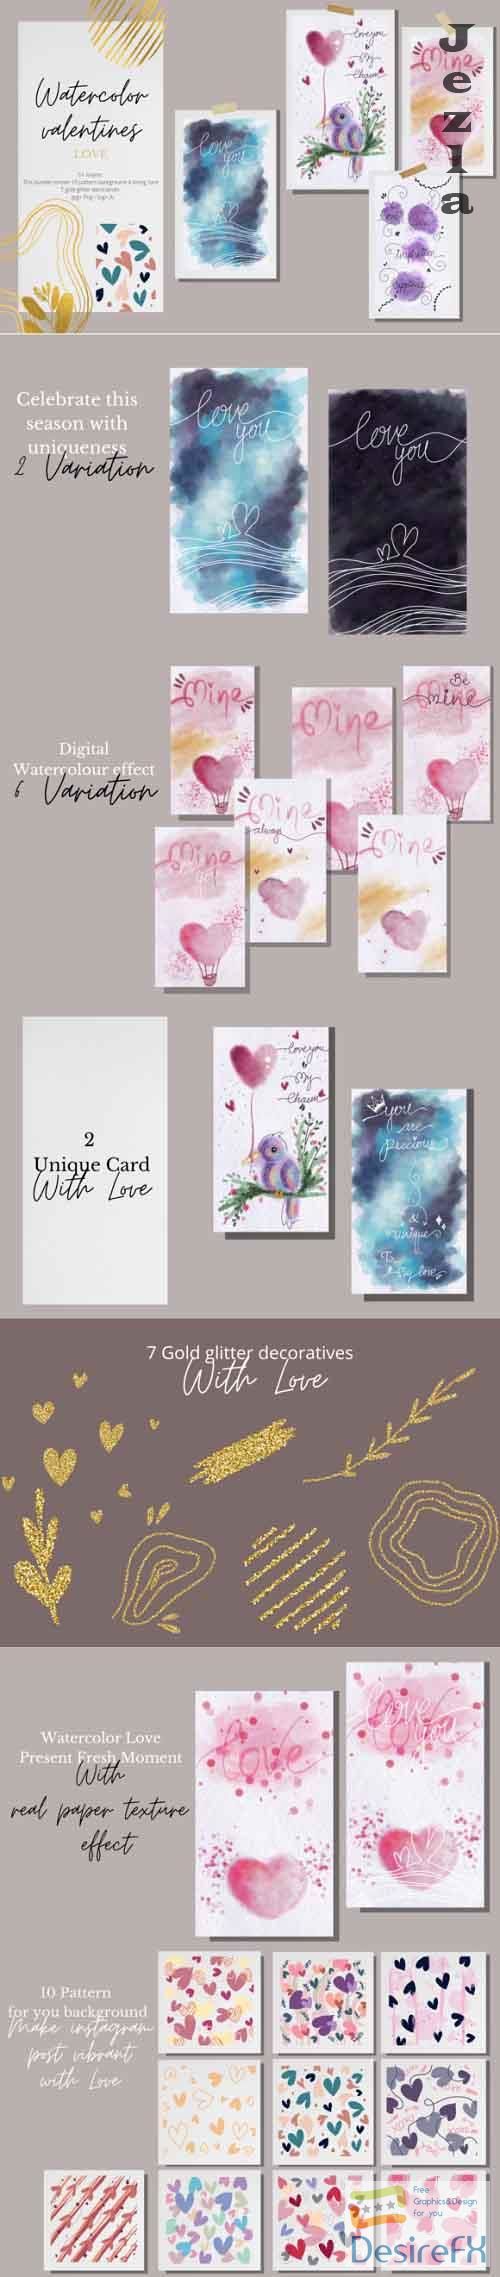 Watercolor Valentines Collection